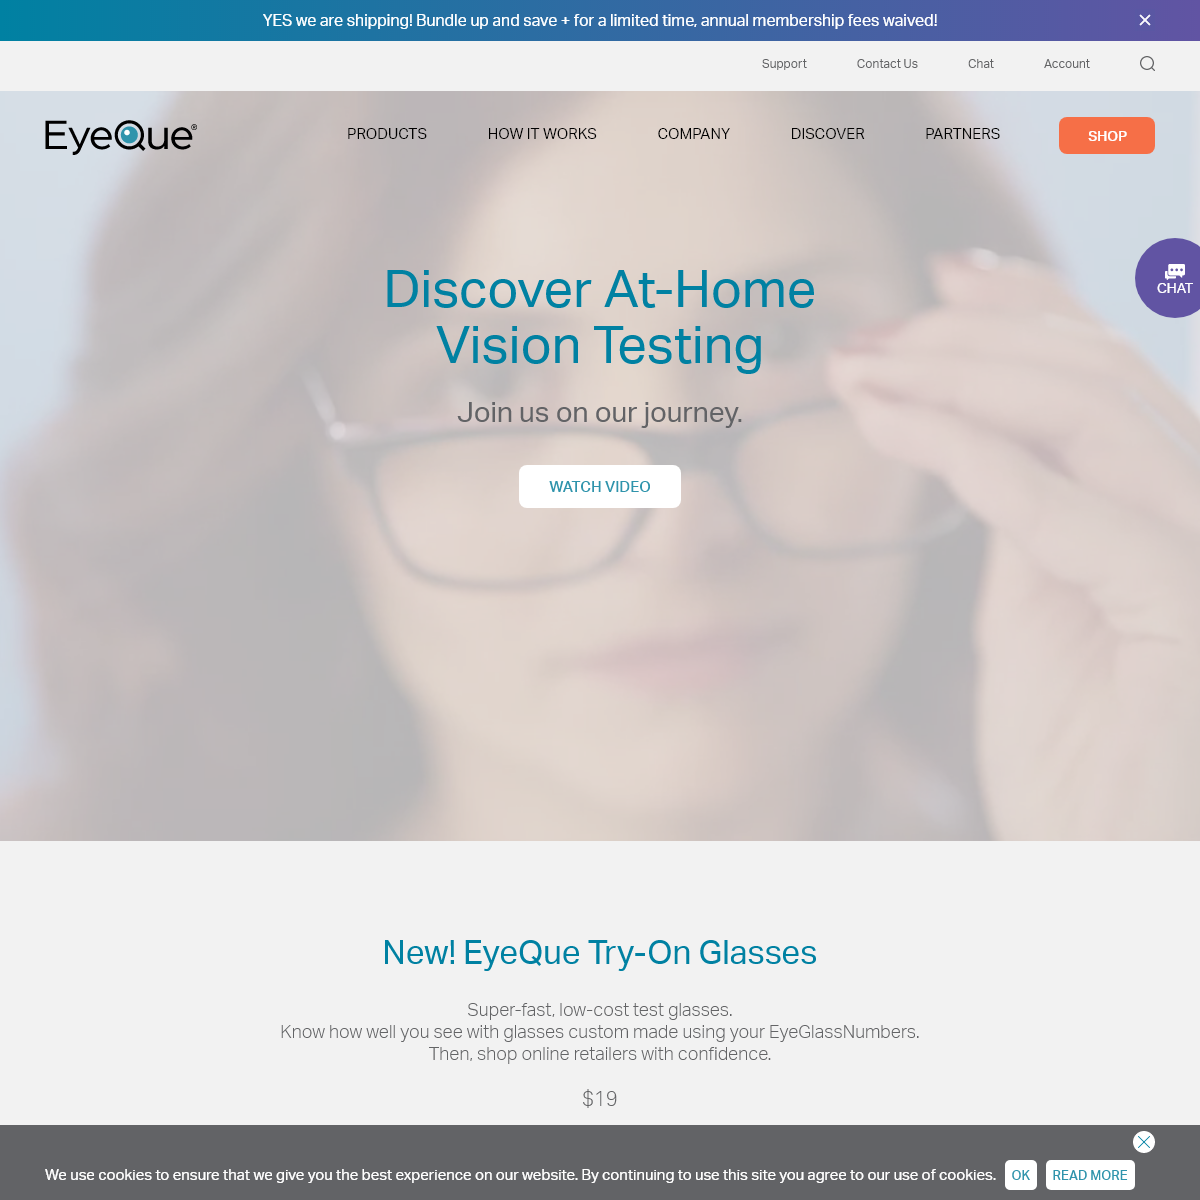 A complete backup of eyeque.com